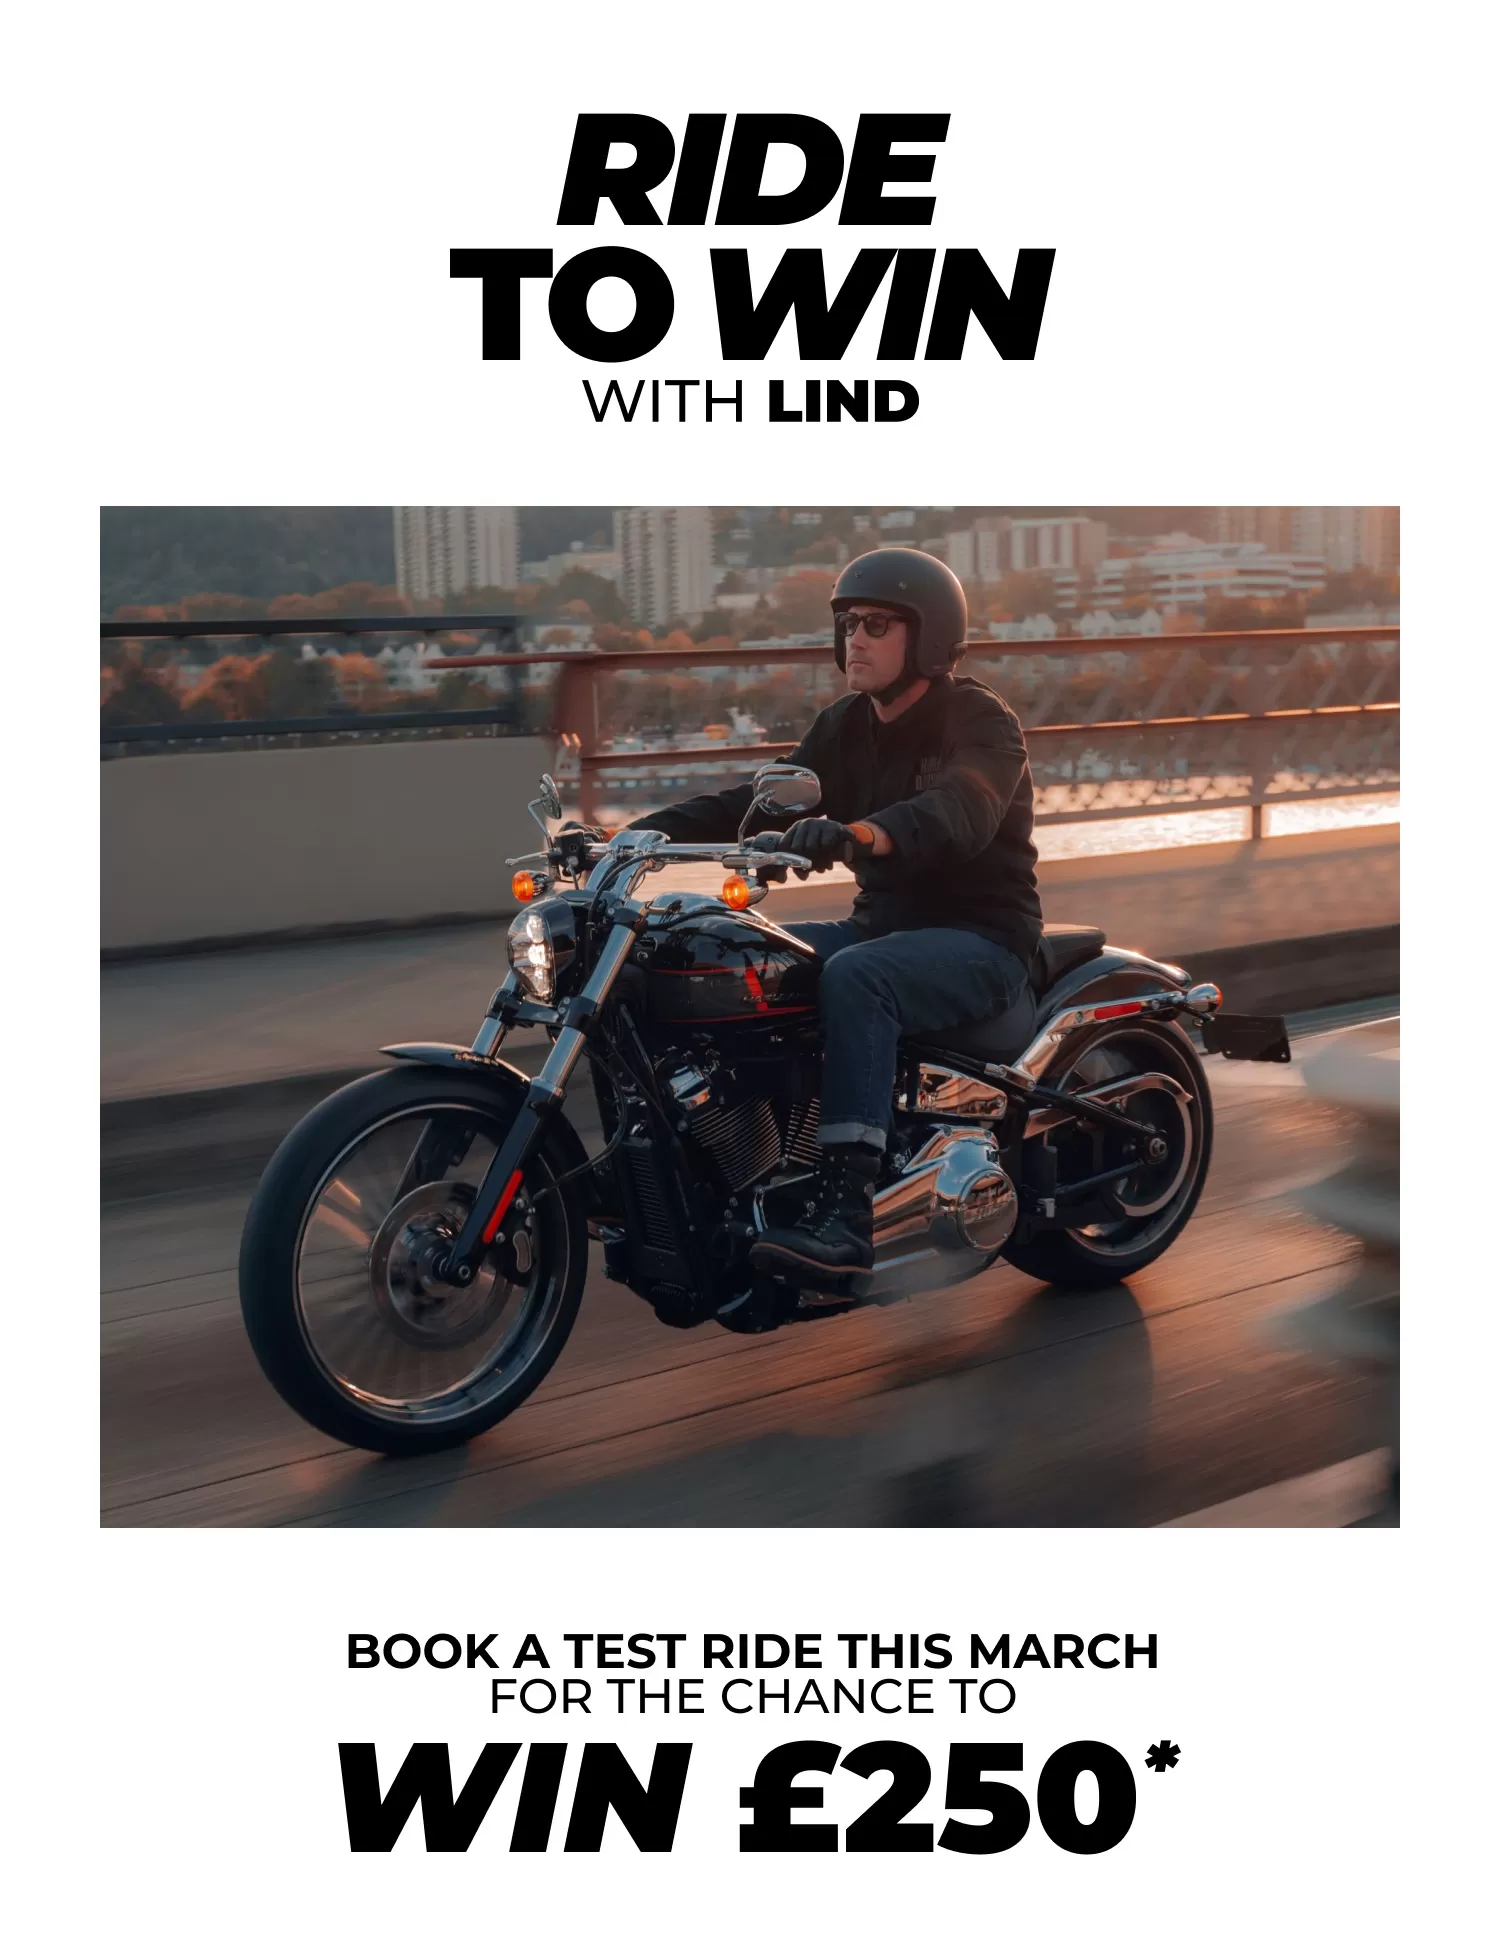 Motorcycle test ride to win £250